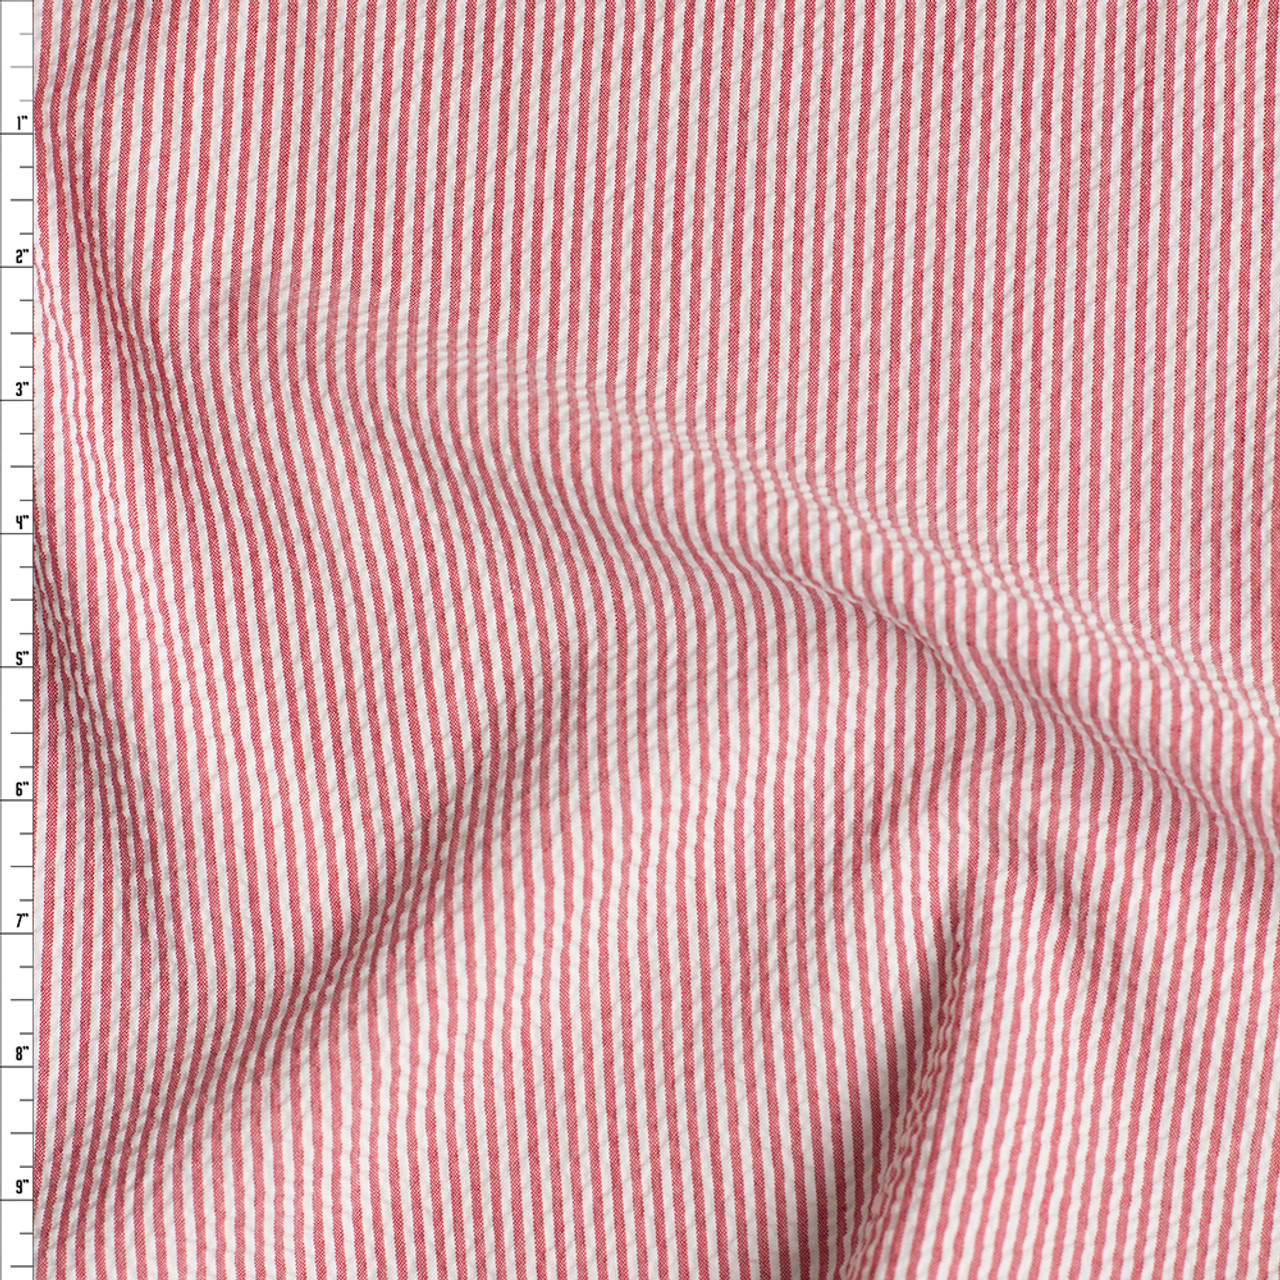 Cali Fabrics Red and White Vertical Stripe Seersucker Fabric by